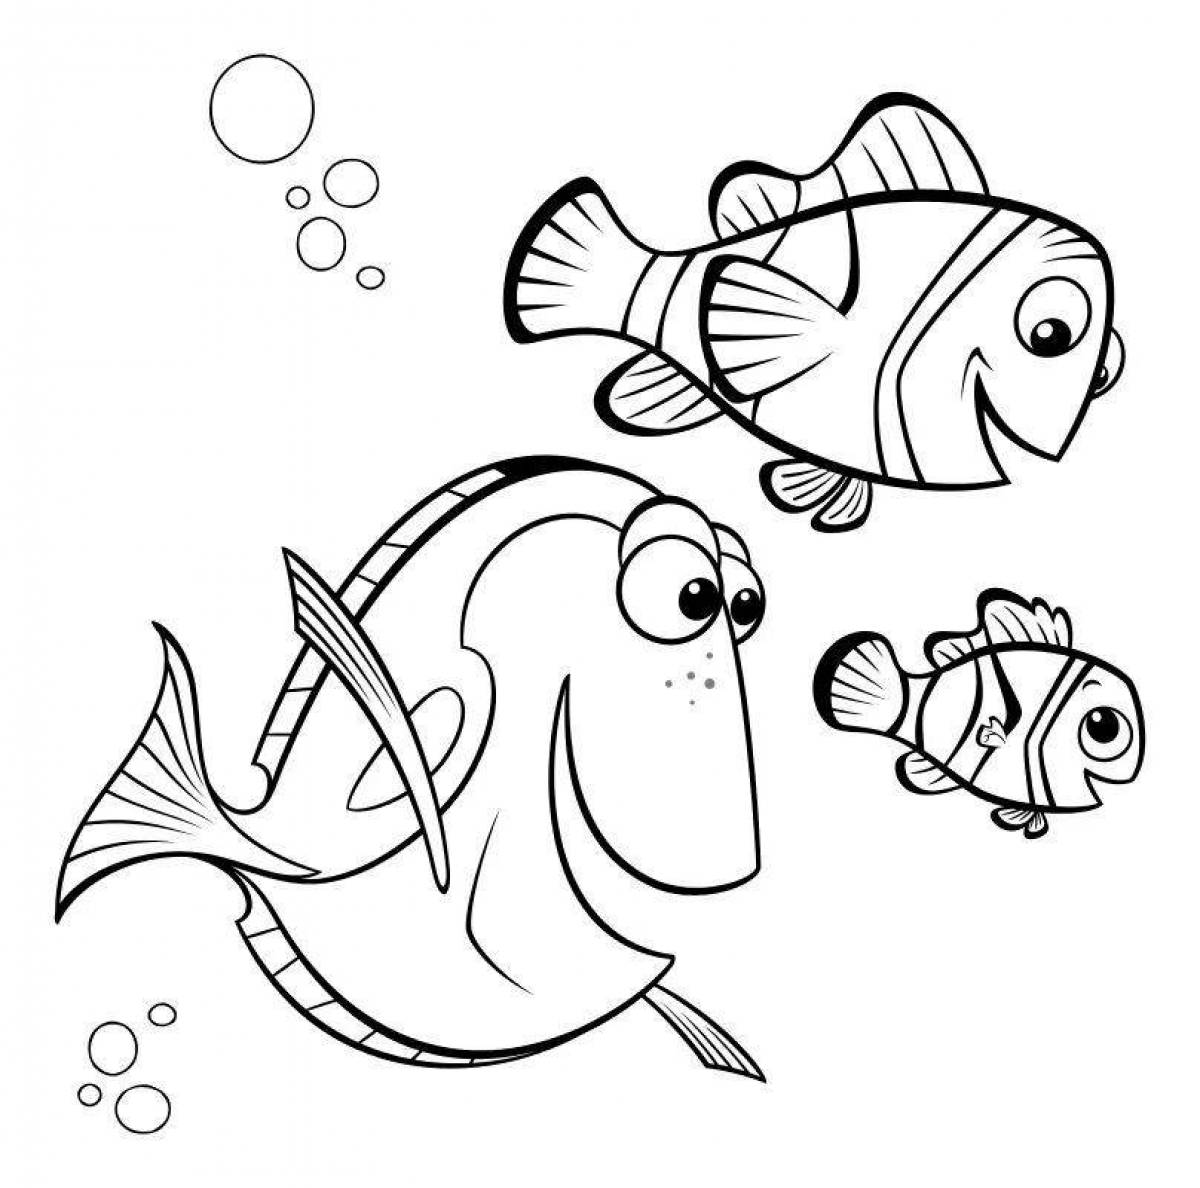 Gorgeous dory fish coloring page